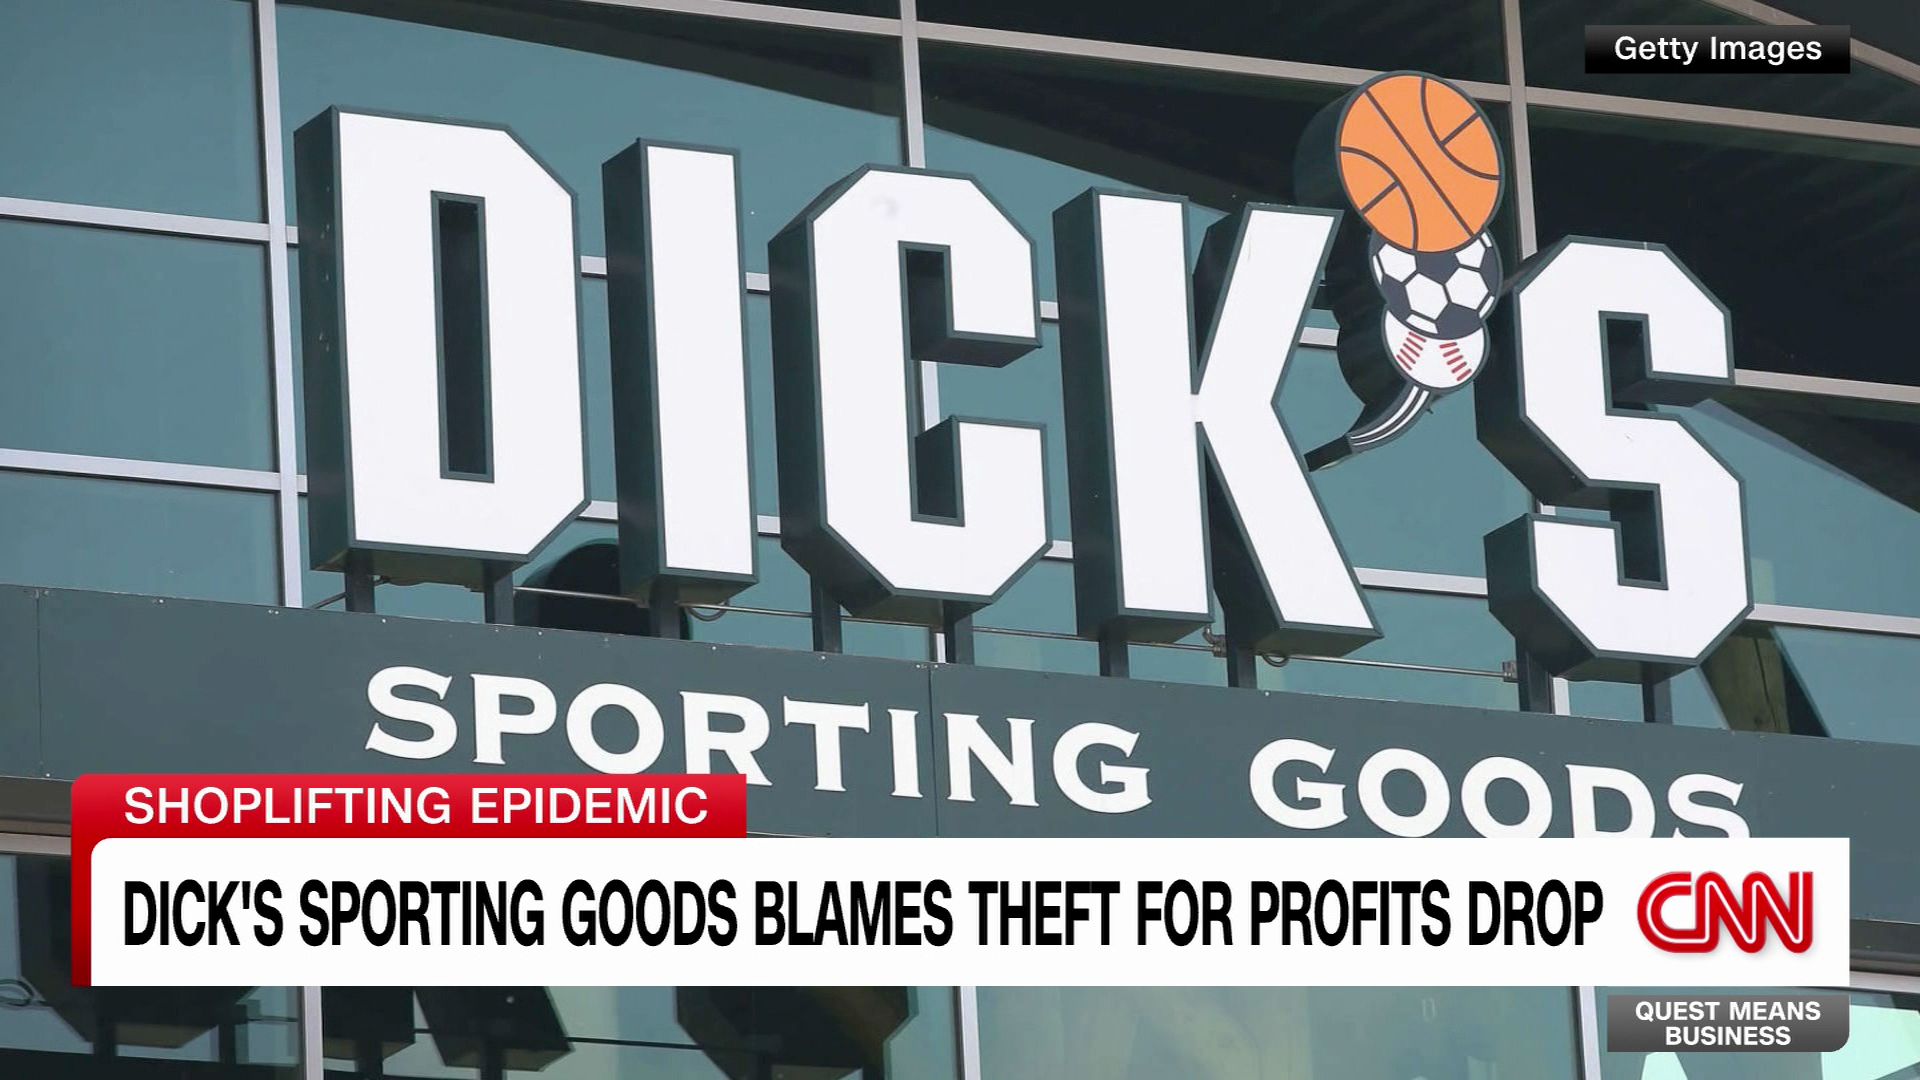 Dick's Sporting Goods to Revamp Stores to Appeal More to Women - Bloomberg